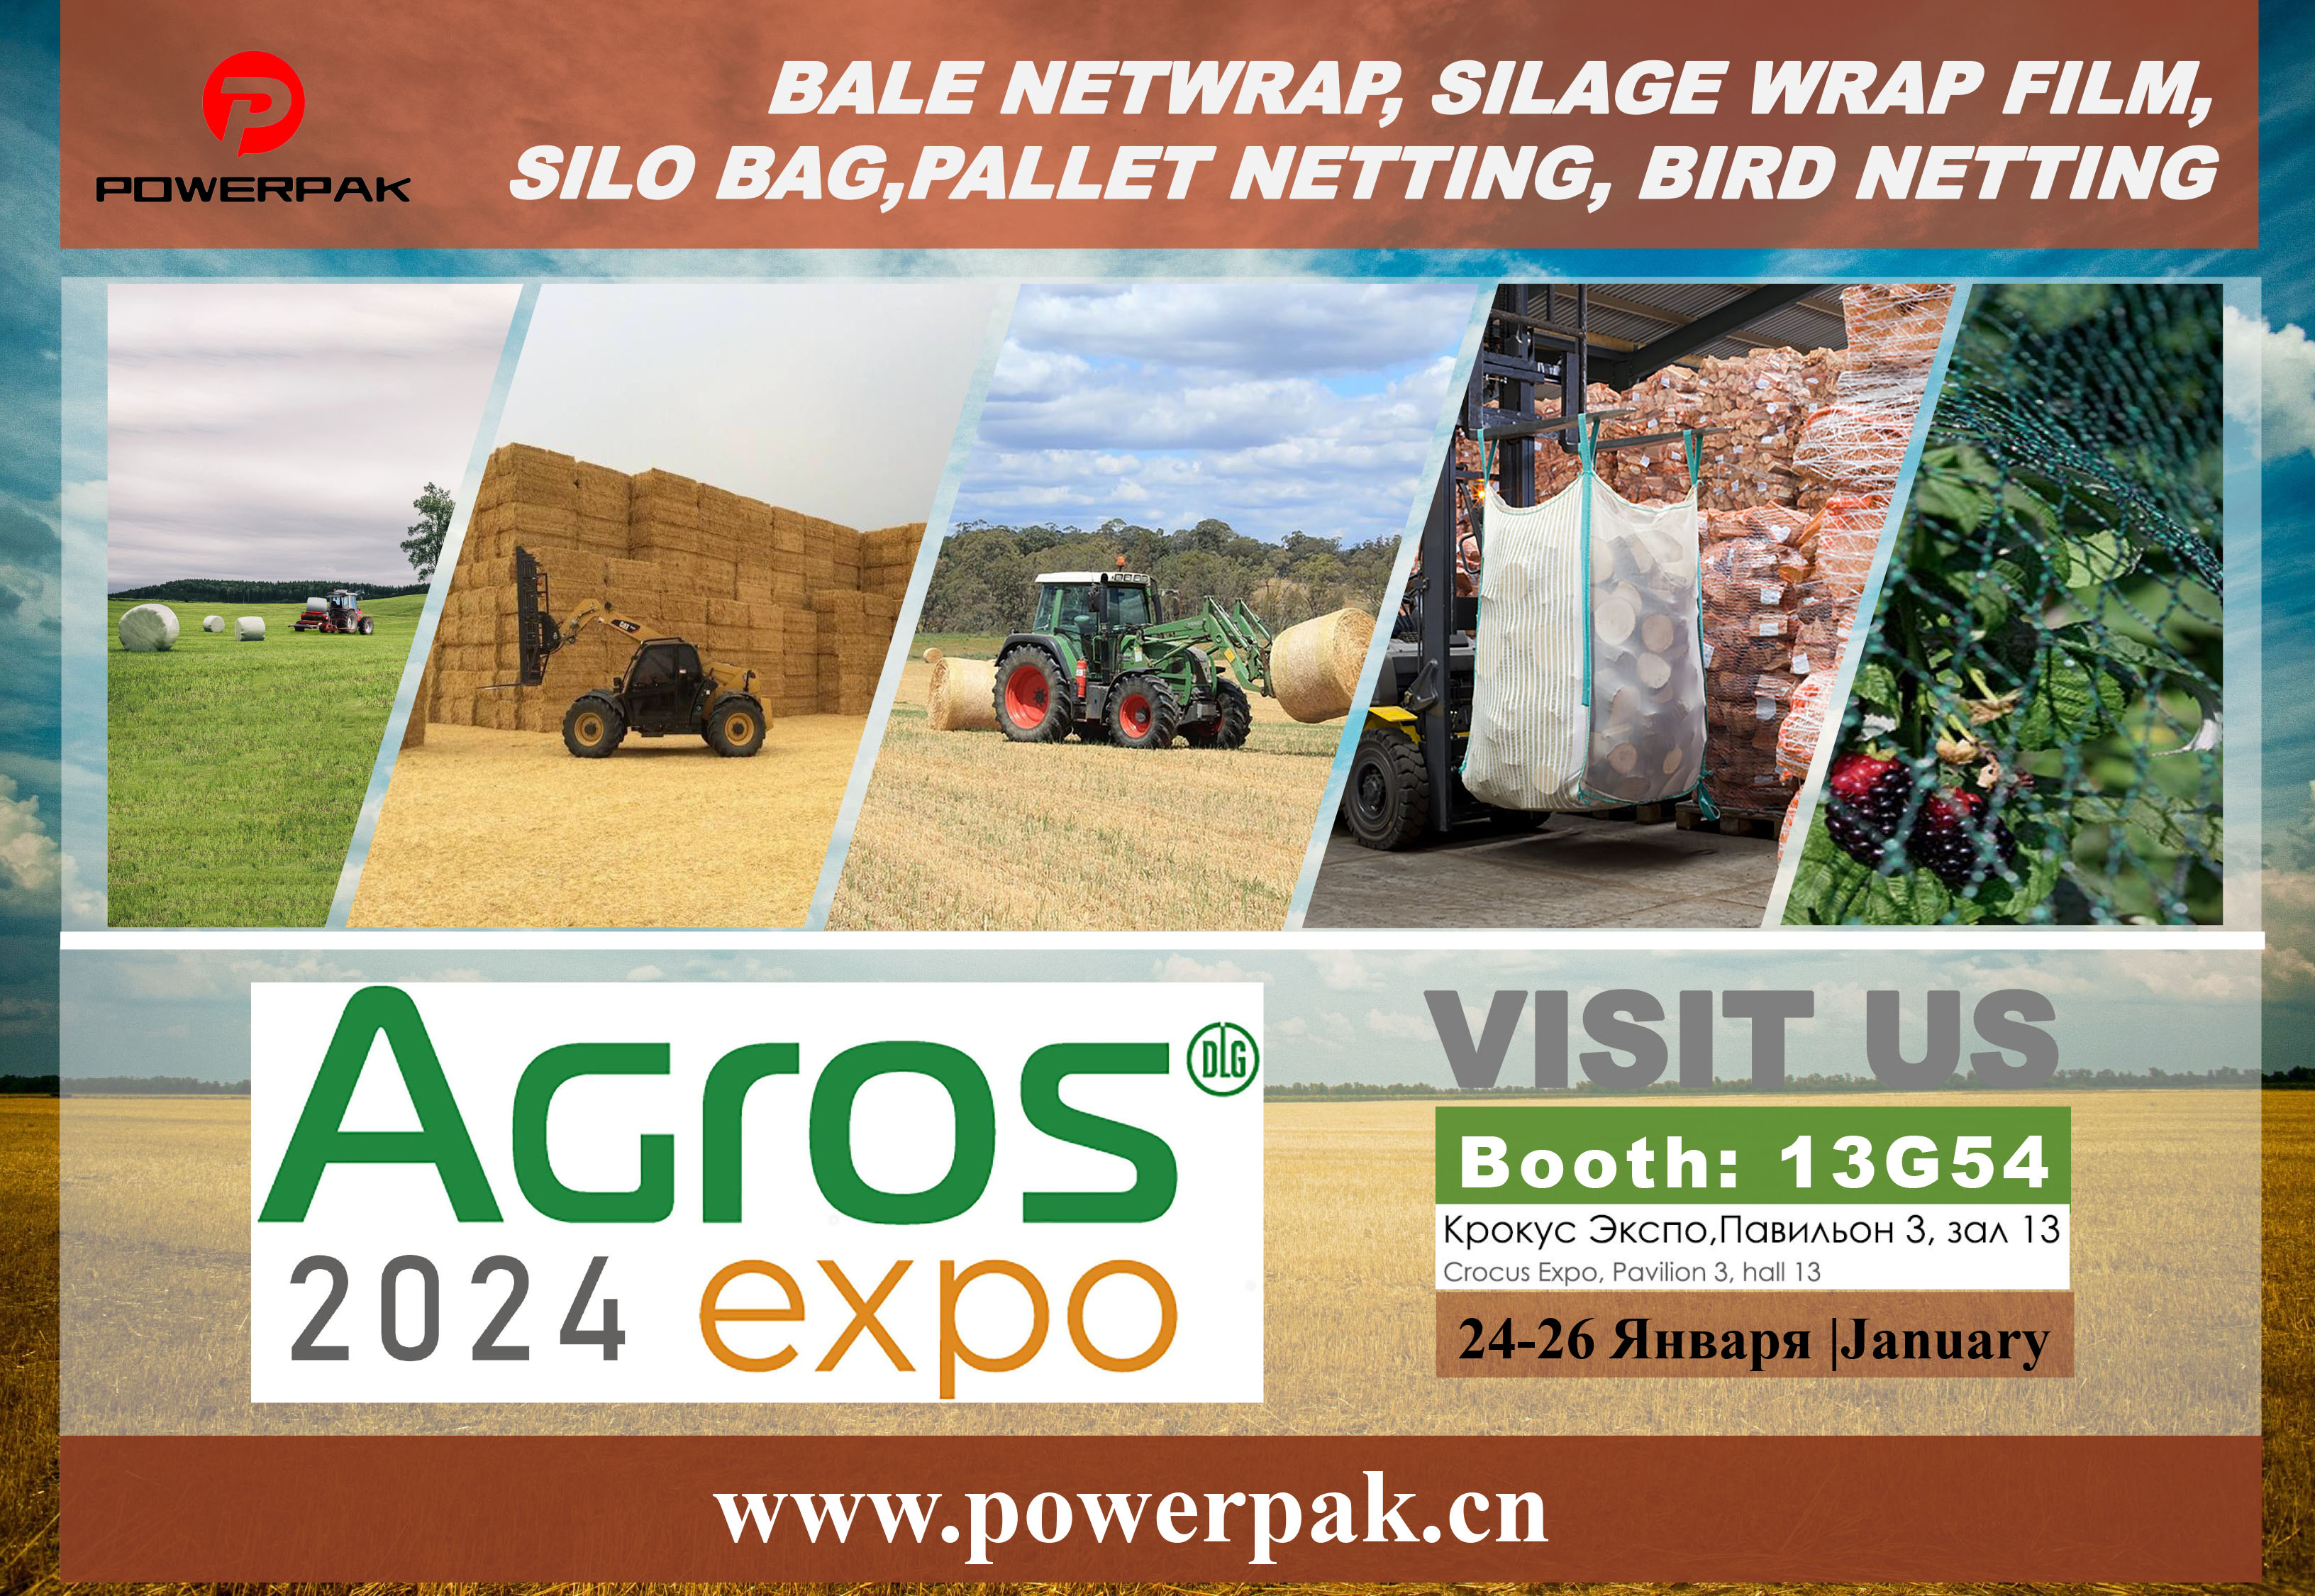 Meet you at Agros 2024 Expo, Jan 24th to 26th, Moscow, Russia